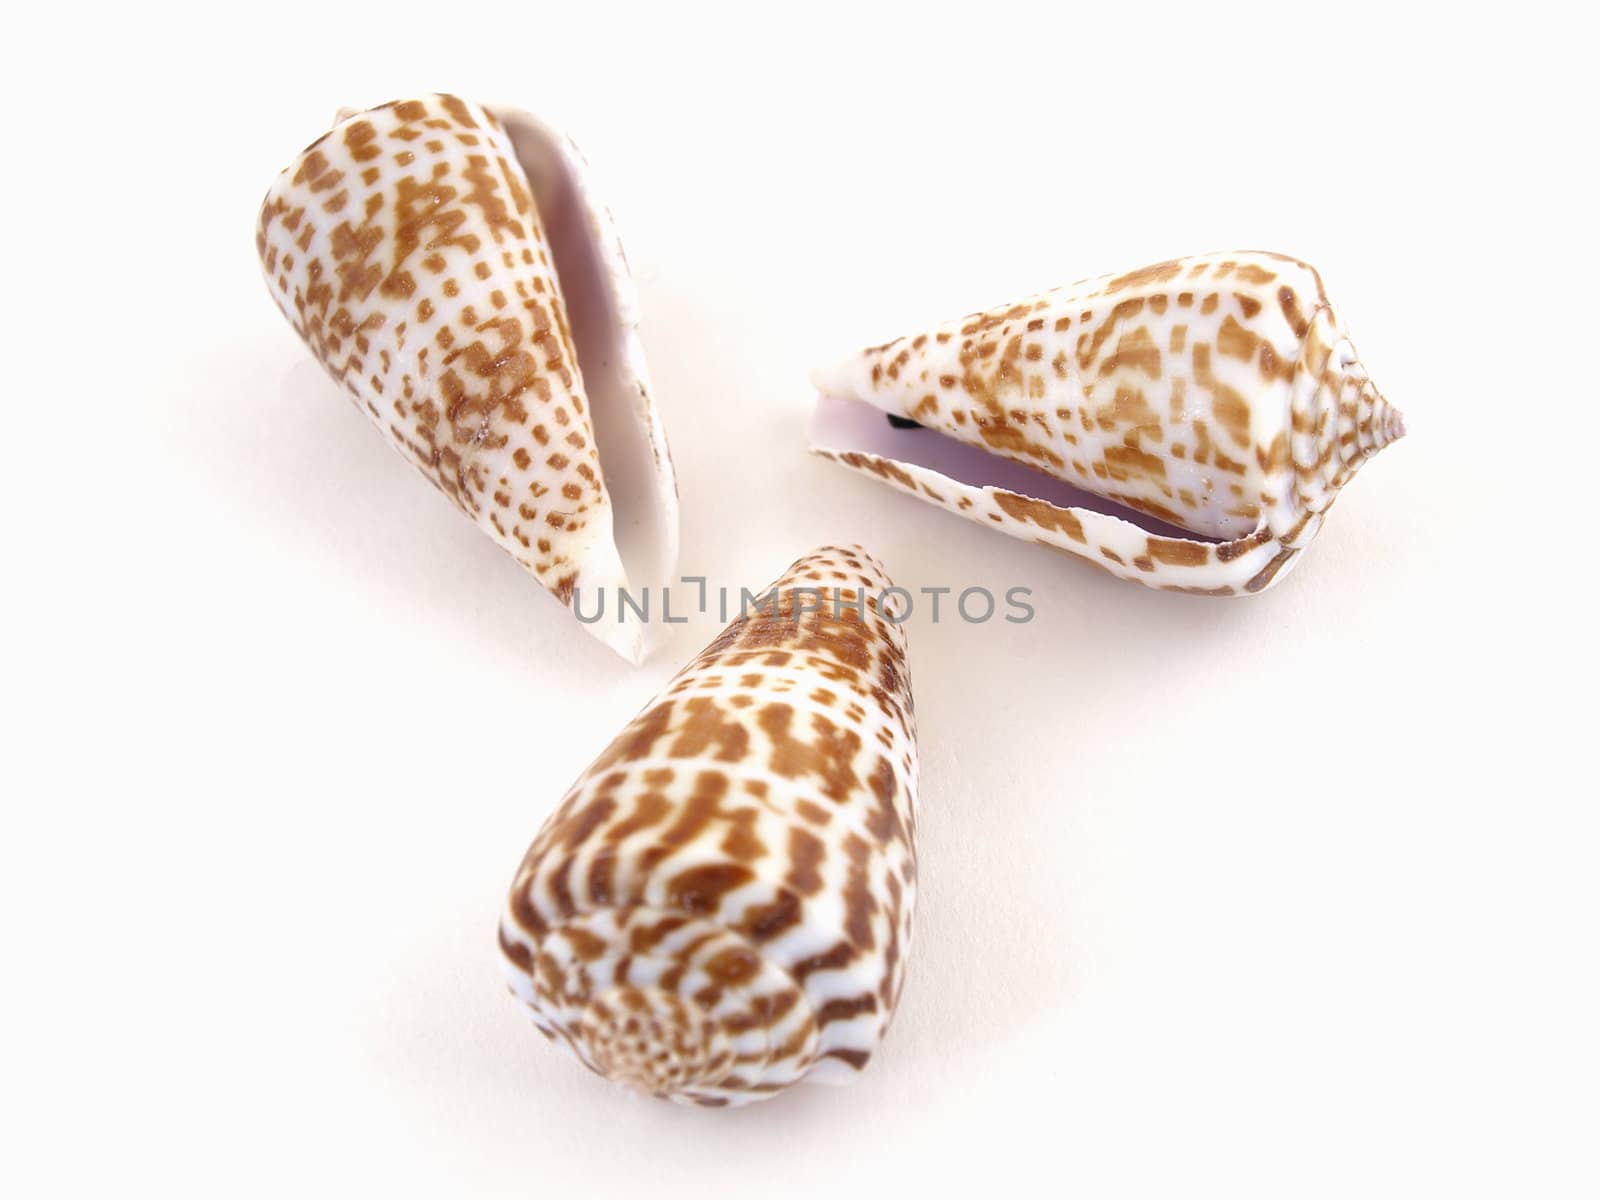 Three sea shells isolated on a white background.